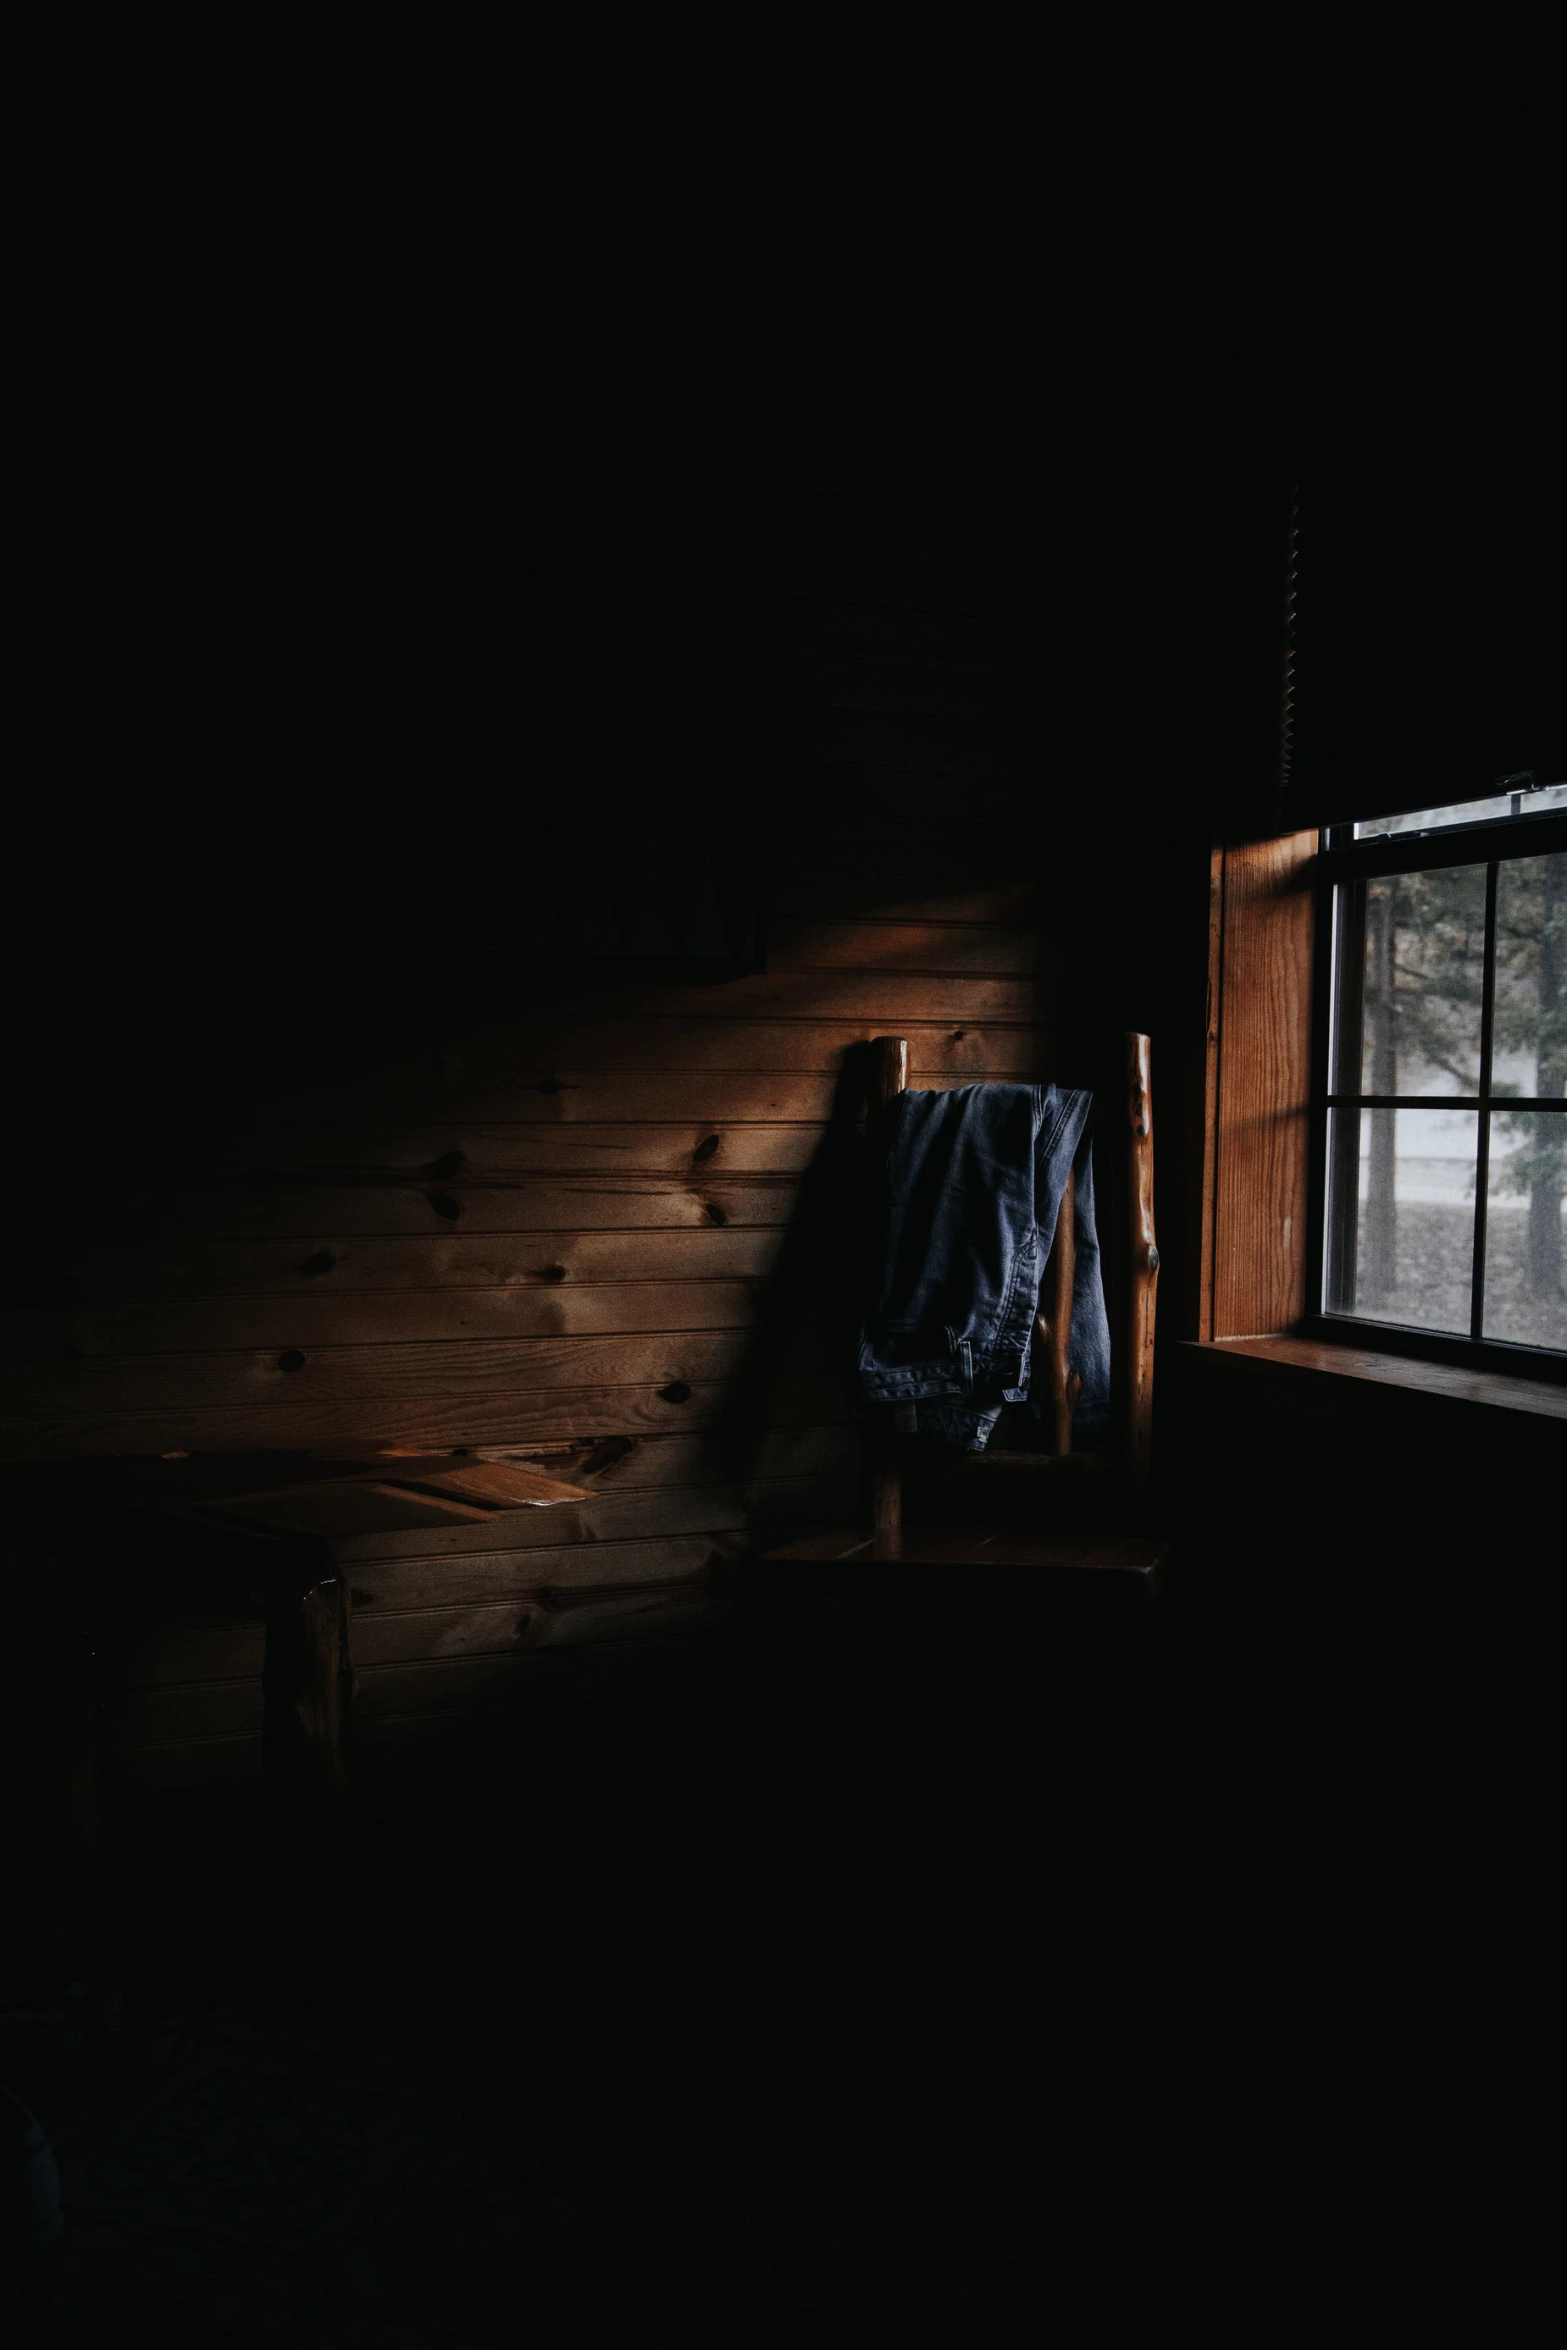 an open window sitting next to a wooden bench in a dark room